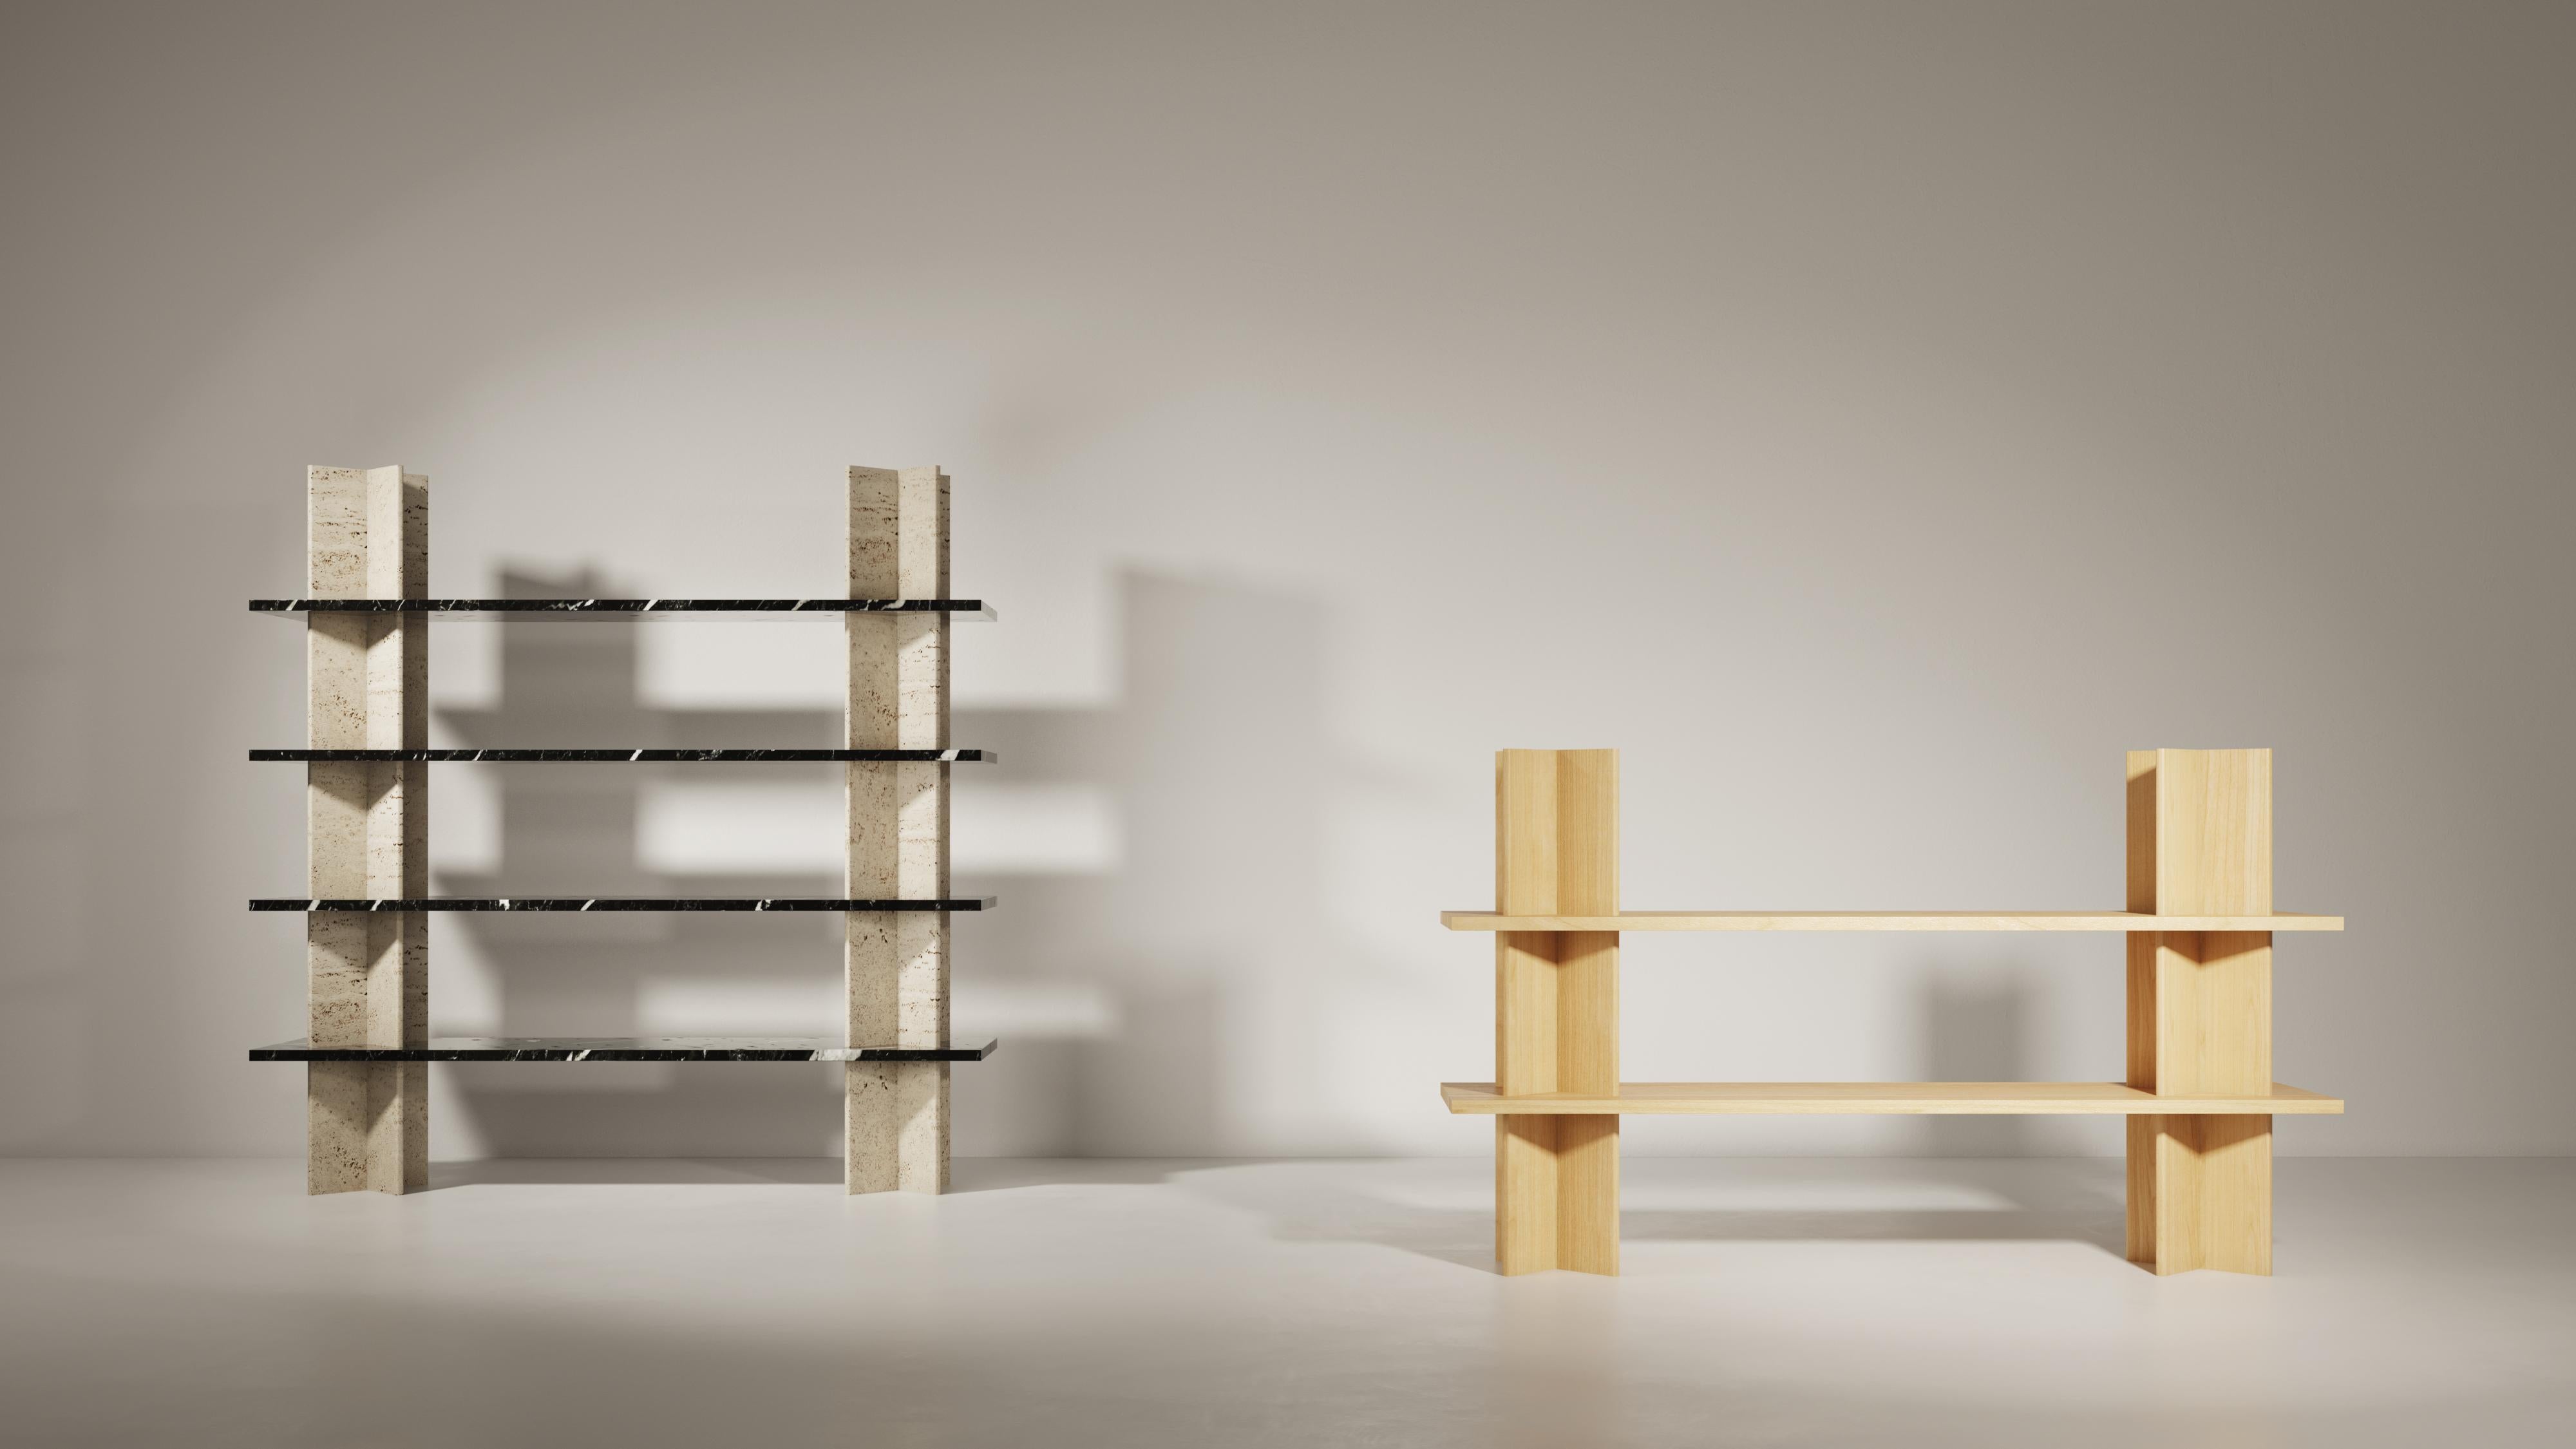 Monument is a collection of shelving units that combines wood and marble. This piece was imagined by Mathieu Girard and Gauthier Pouillart of Atelier Cocorico.
The visual strength and stability of Monument relies on an ingenious construction system